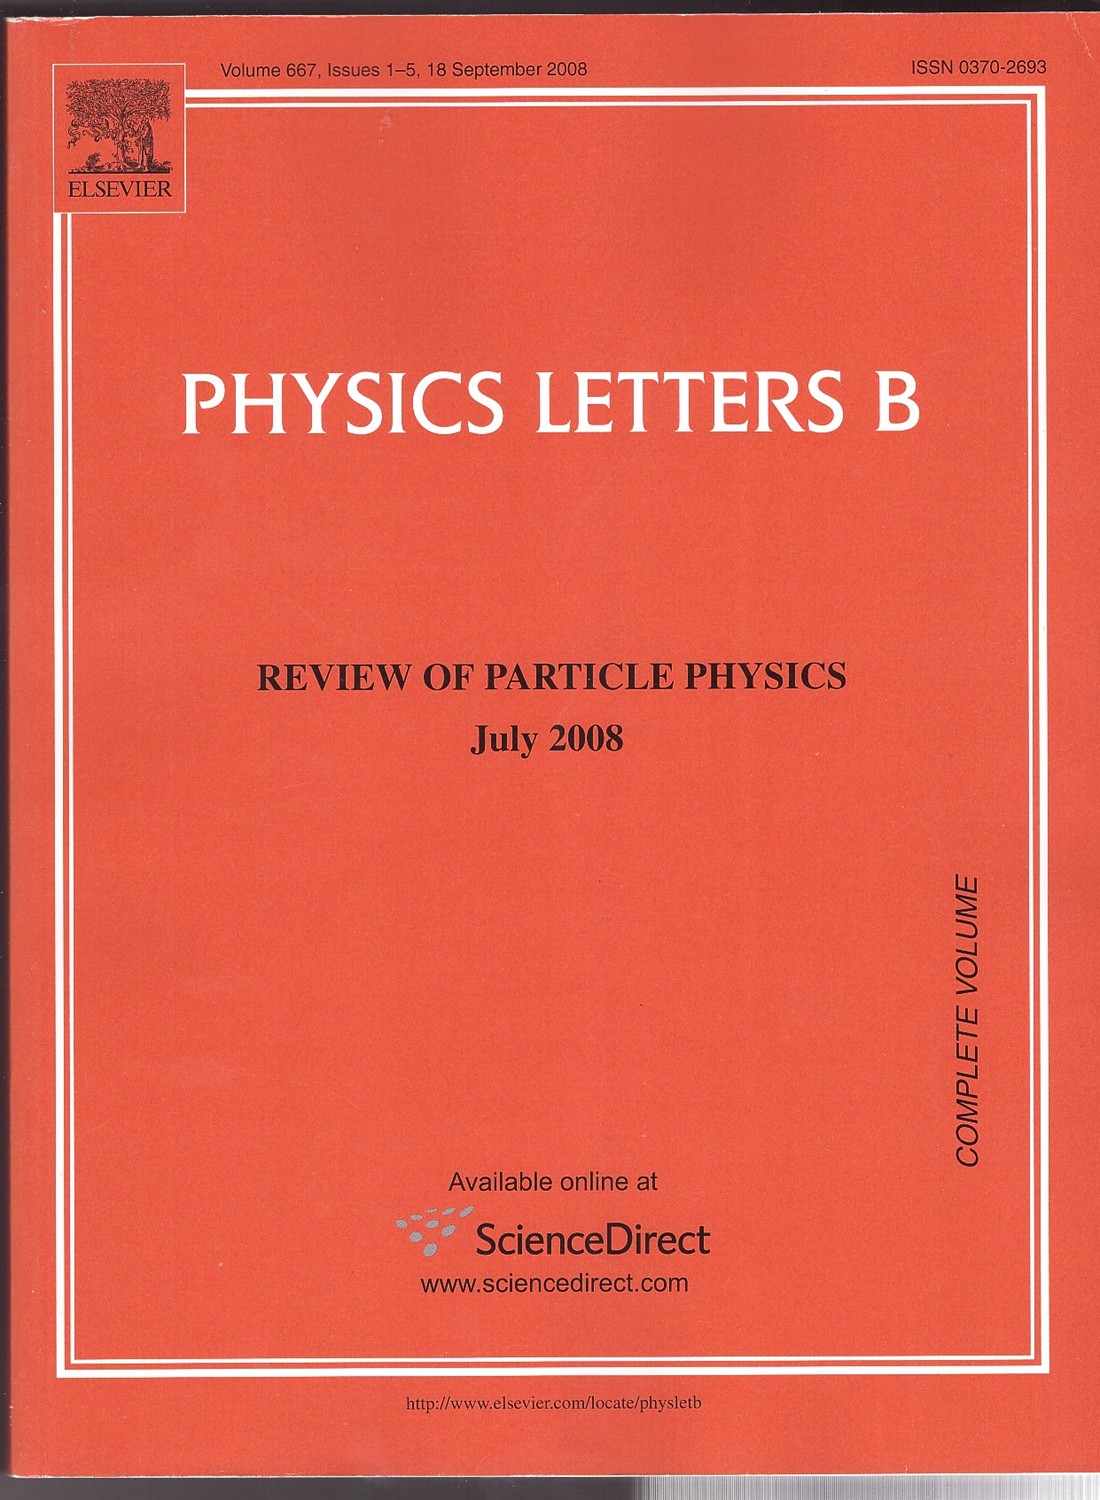  - Physics Letters B , Review of Particle Physics July 2008